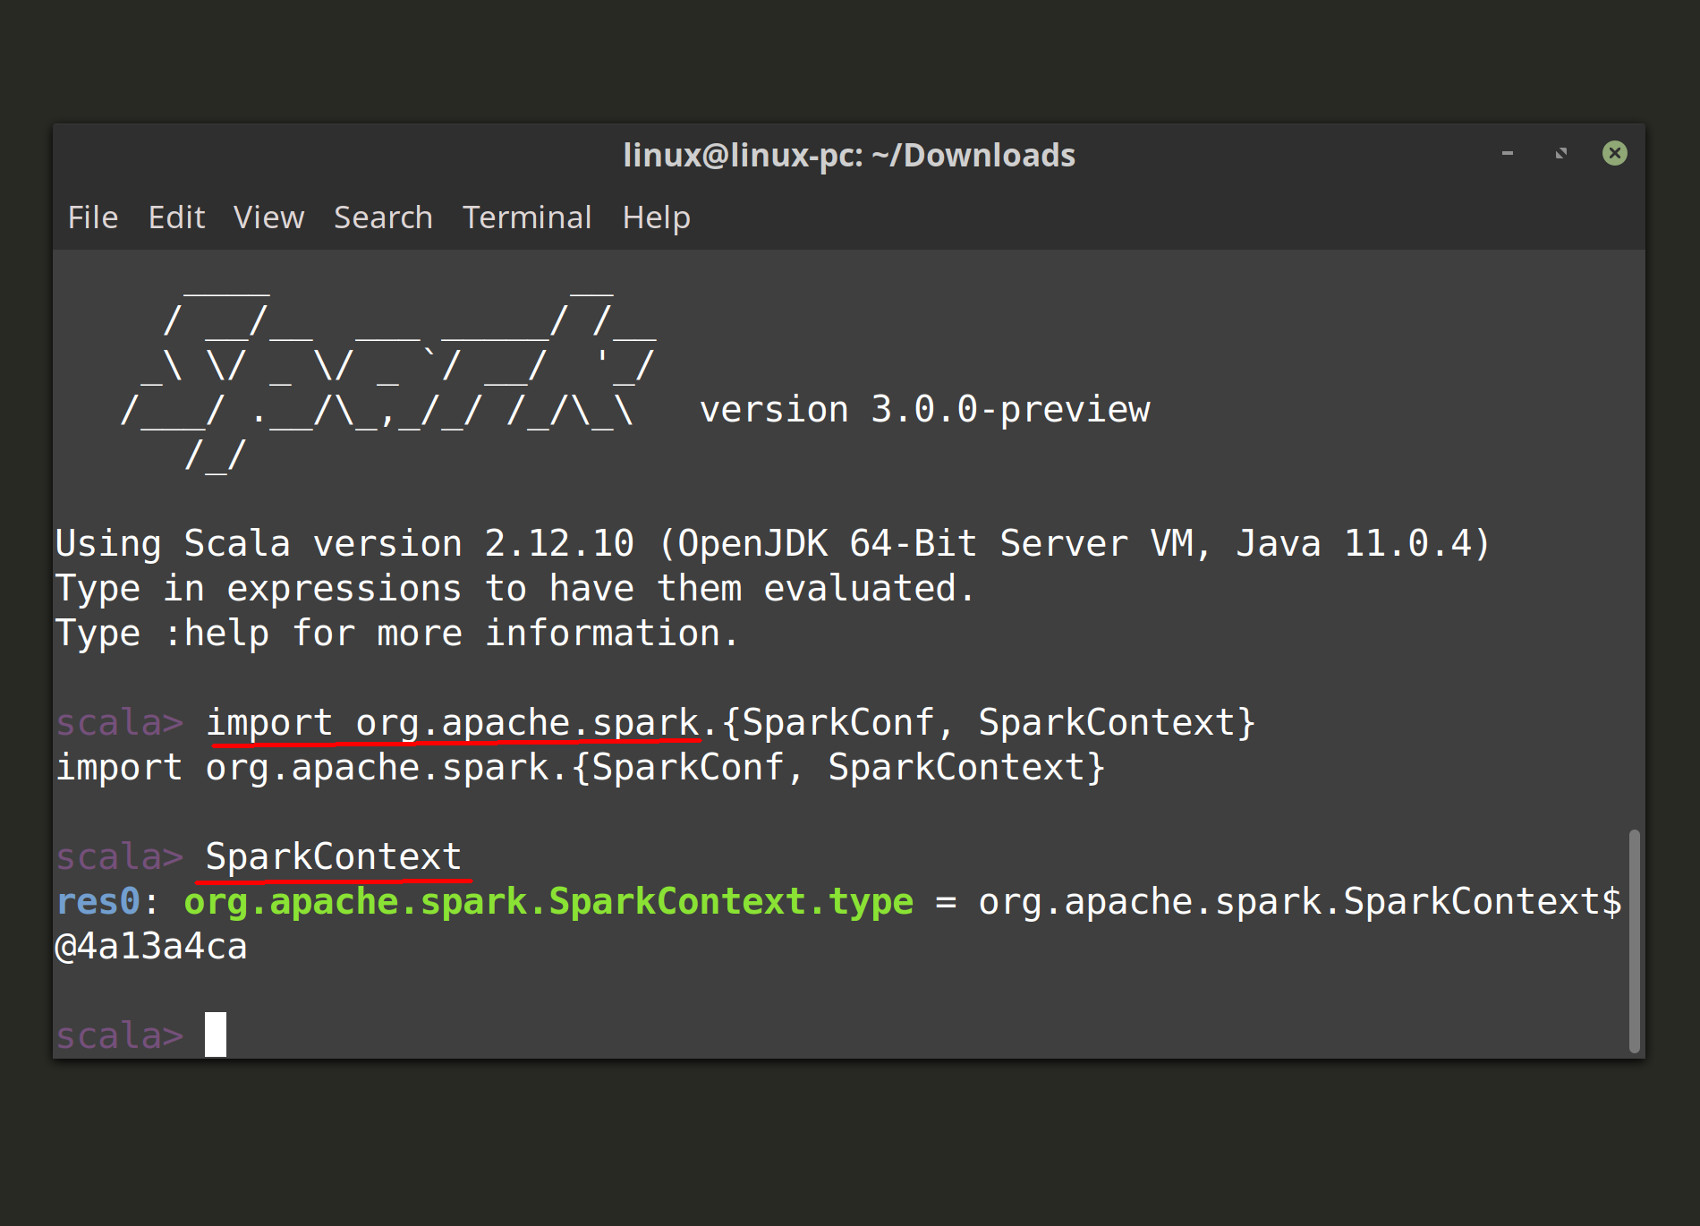 Screenshot of Spark importing libraries scala spark-shell